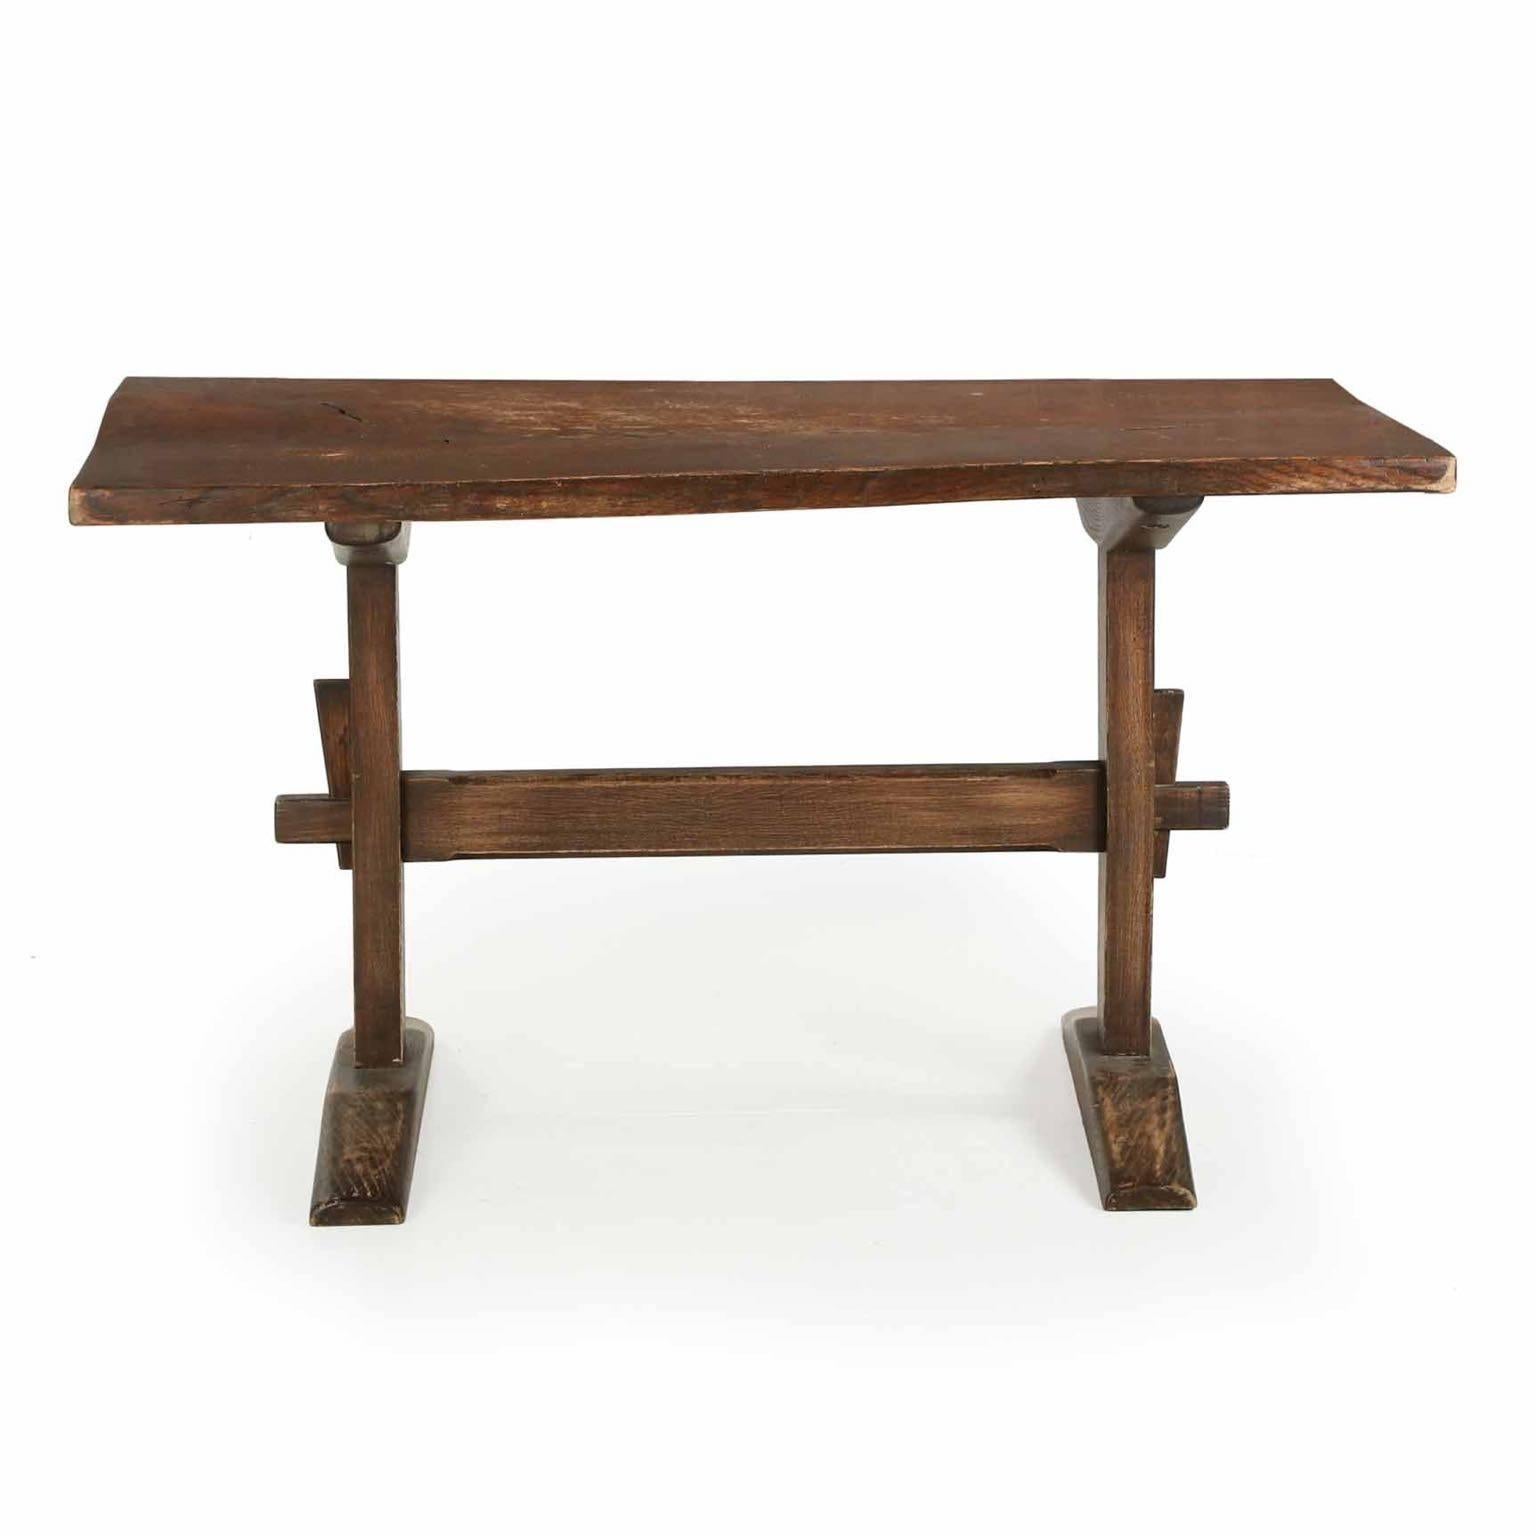 This is a quite attractive and relatively small trestle style library table with the strictly utilitarian construction preferred during throughout the Arts & Crafts movement.  There is a Shaker-like simplicity, the symmetry between the footings and